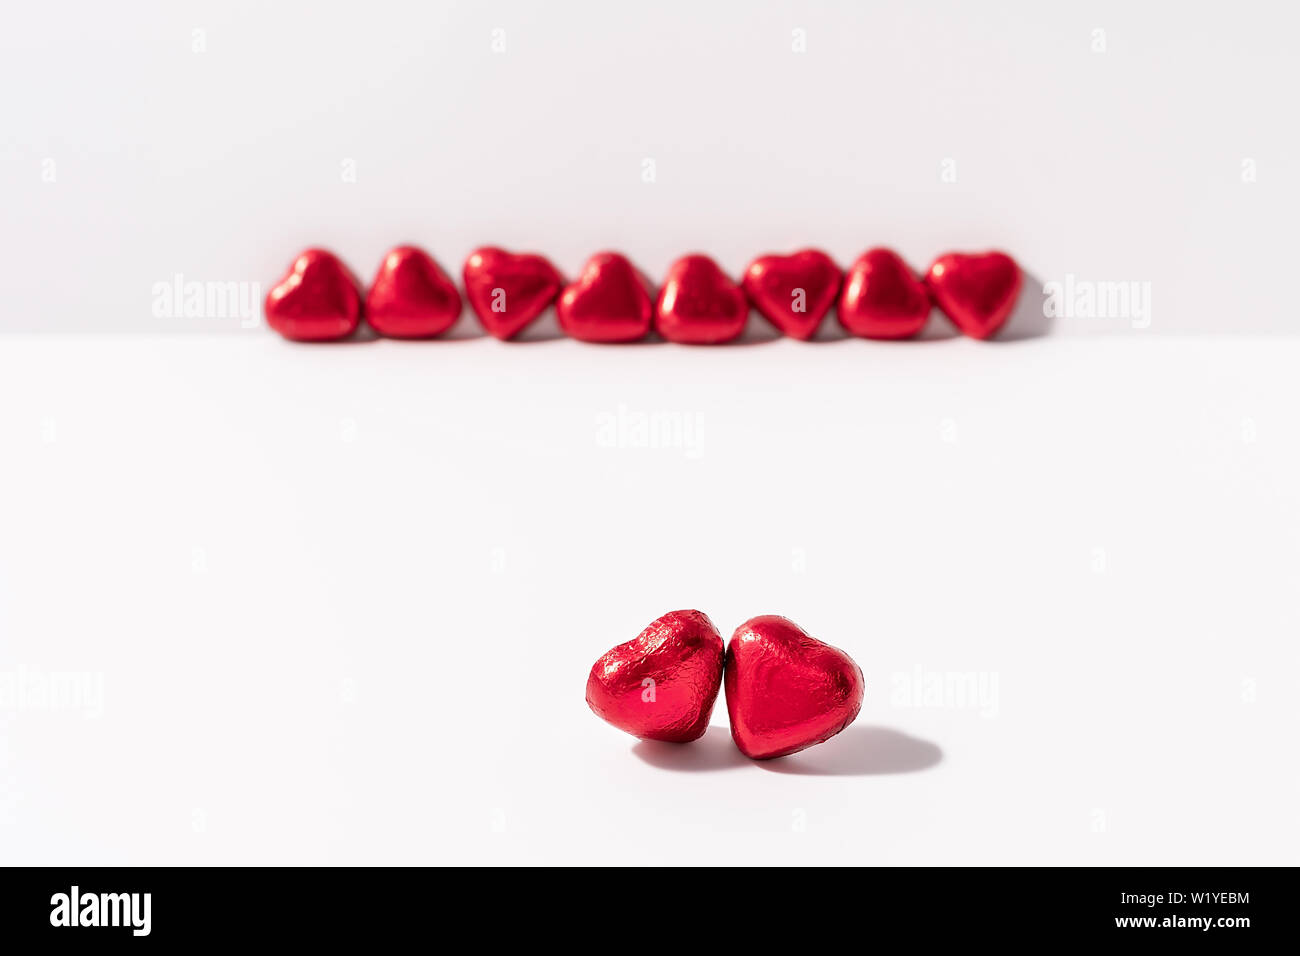 Heart shape chocolates wrapped in red foil on white background. Valentines day gift. Love and parting concept. Copy space. Stock Photo